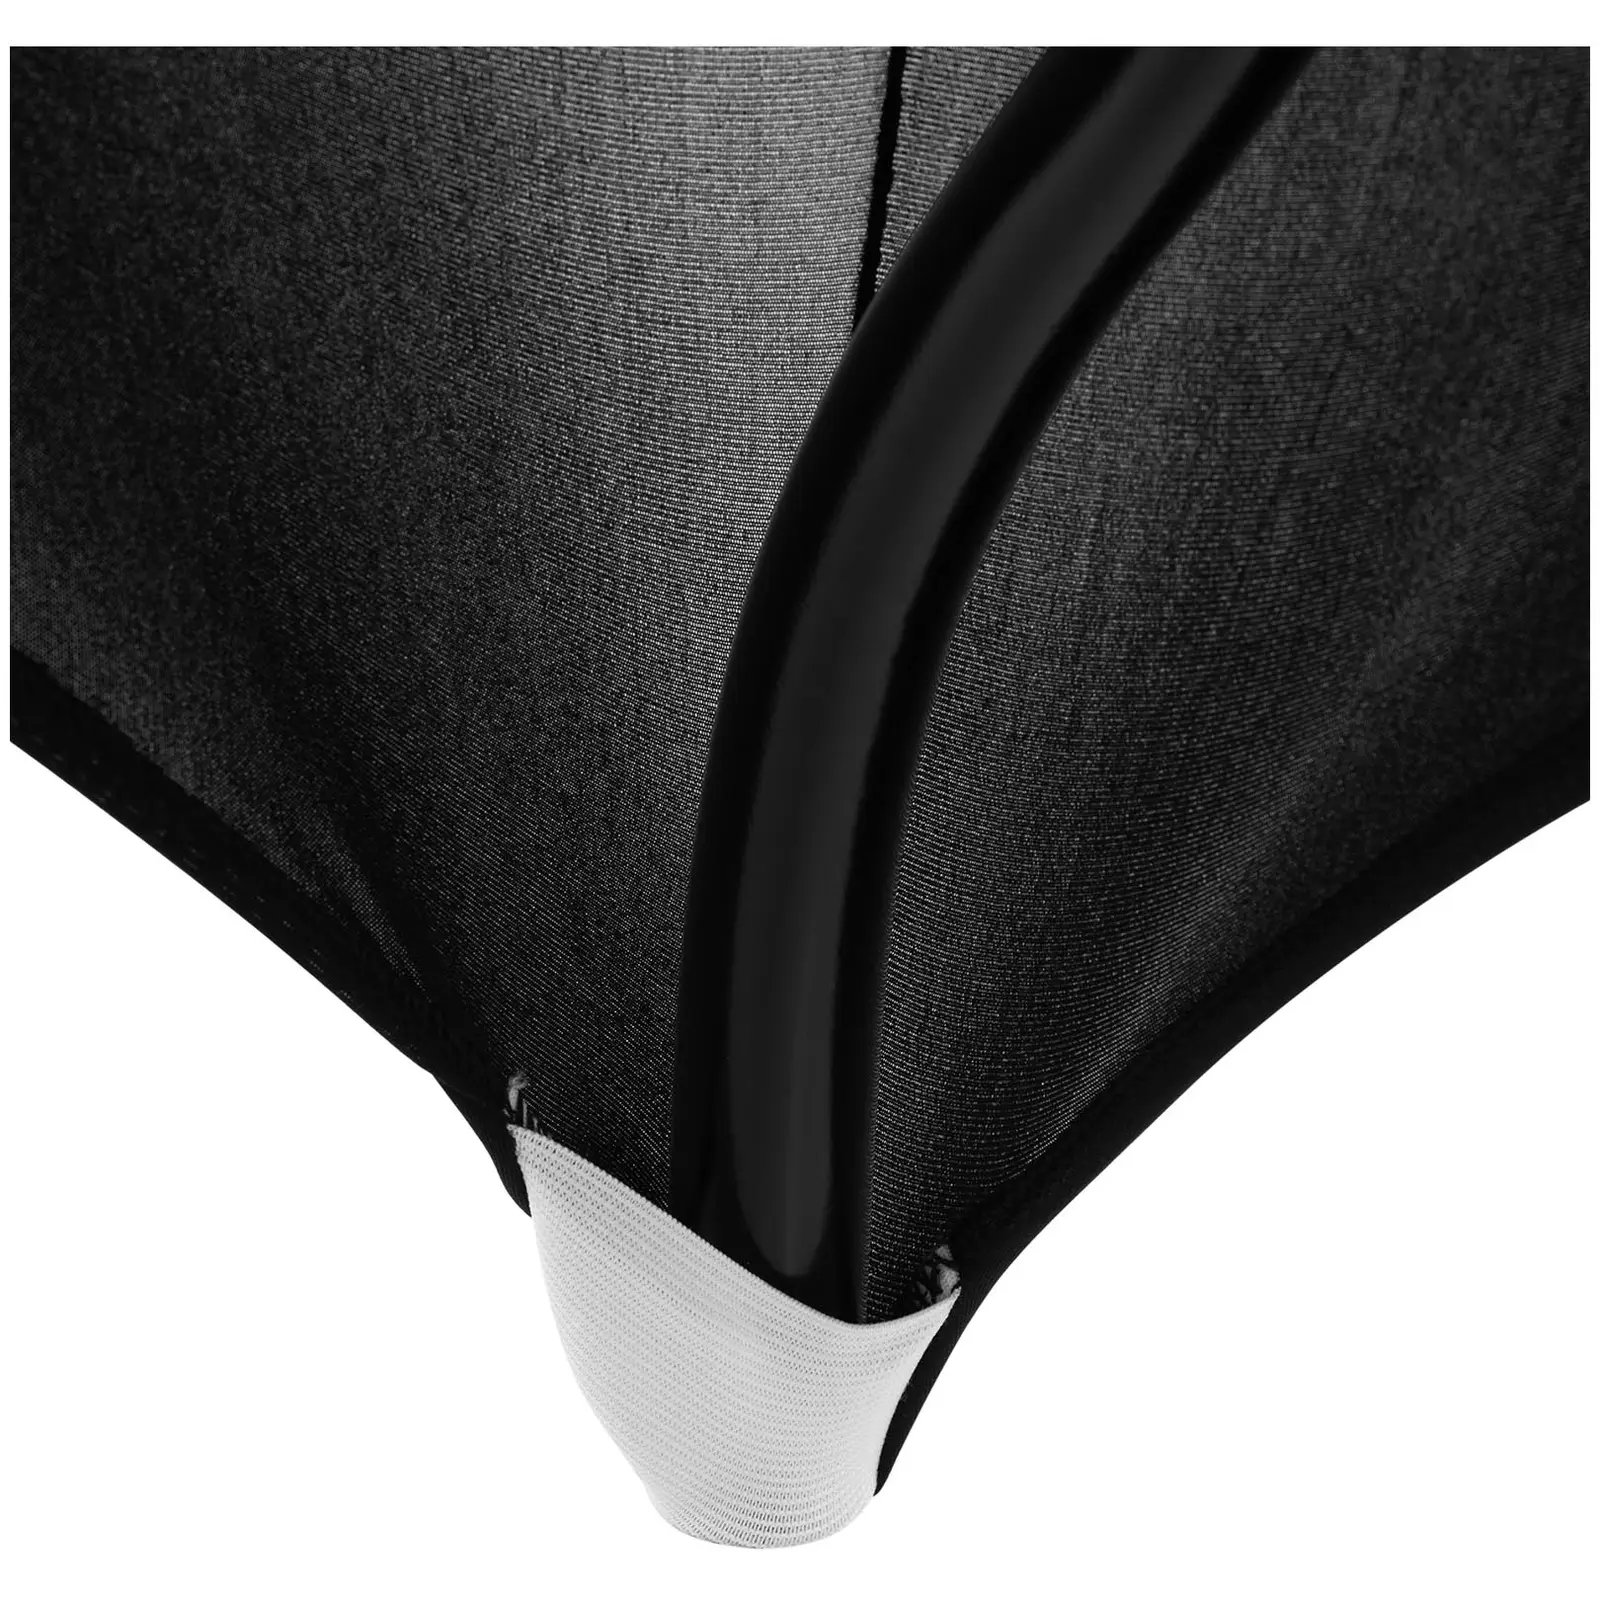 Table Cover - Black - Royal Catering